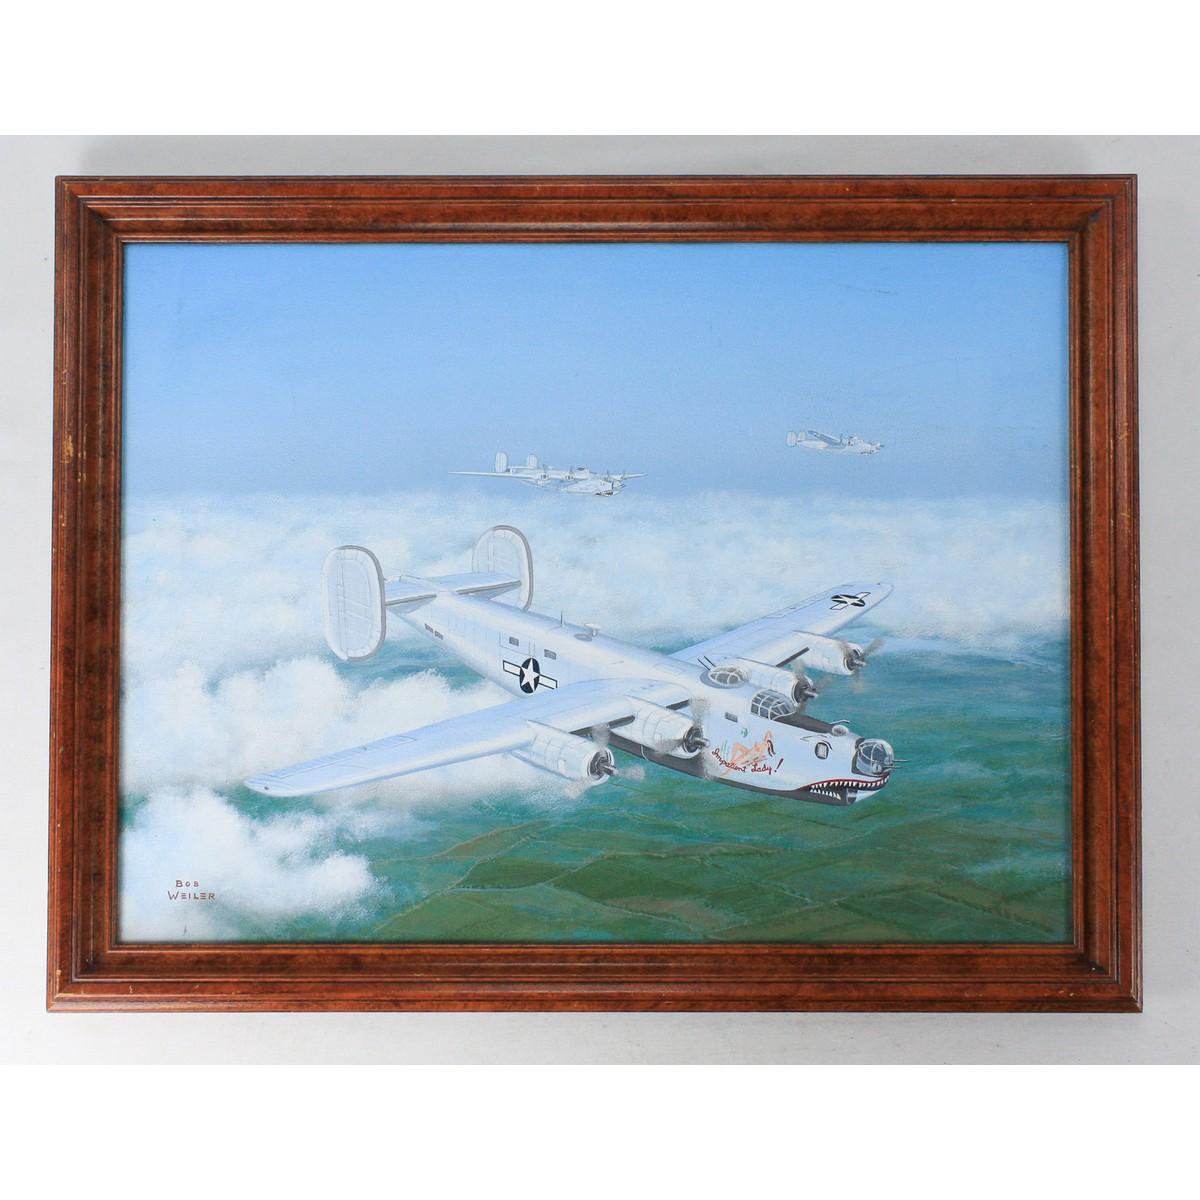 Bob Weiler "B-24 Bomber Impatient Lady" Painting